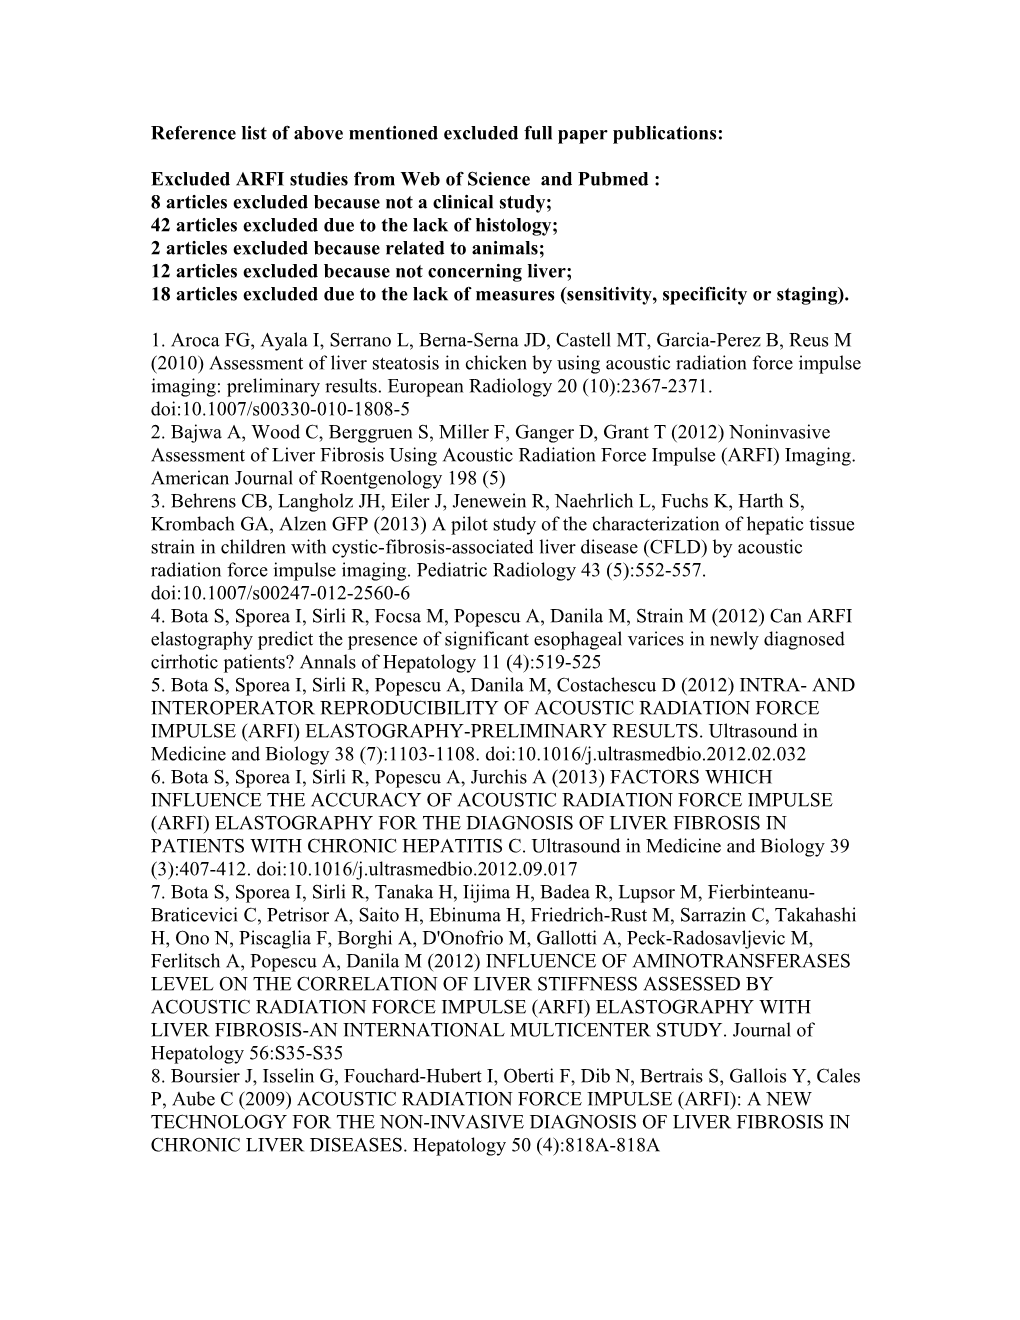 Reference List of Above Mentioned Excluded Full Paper Publications